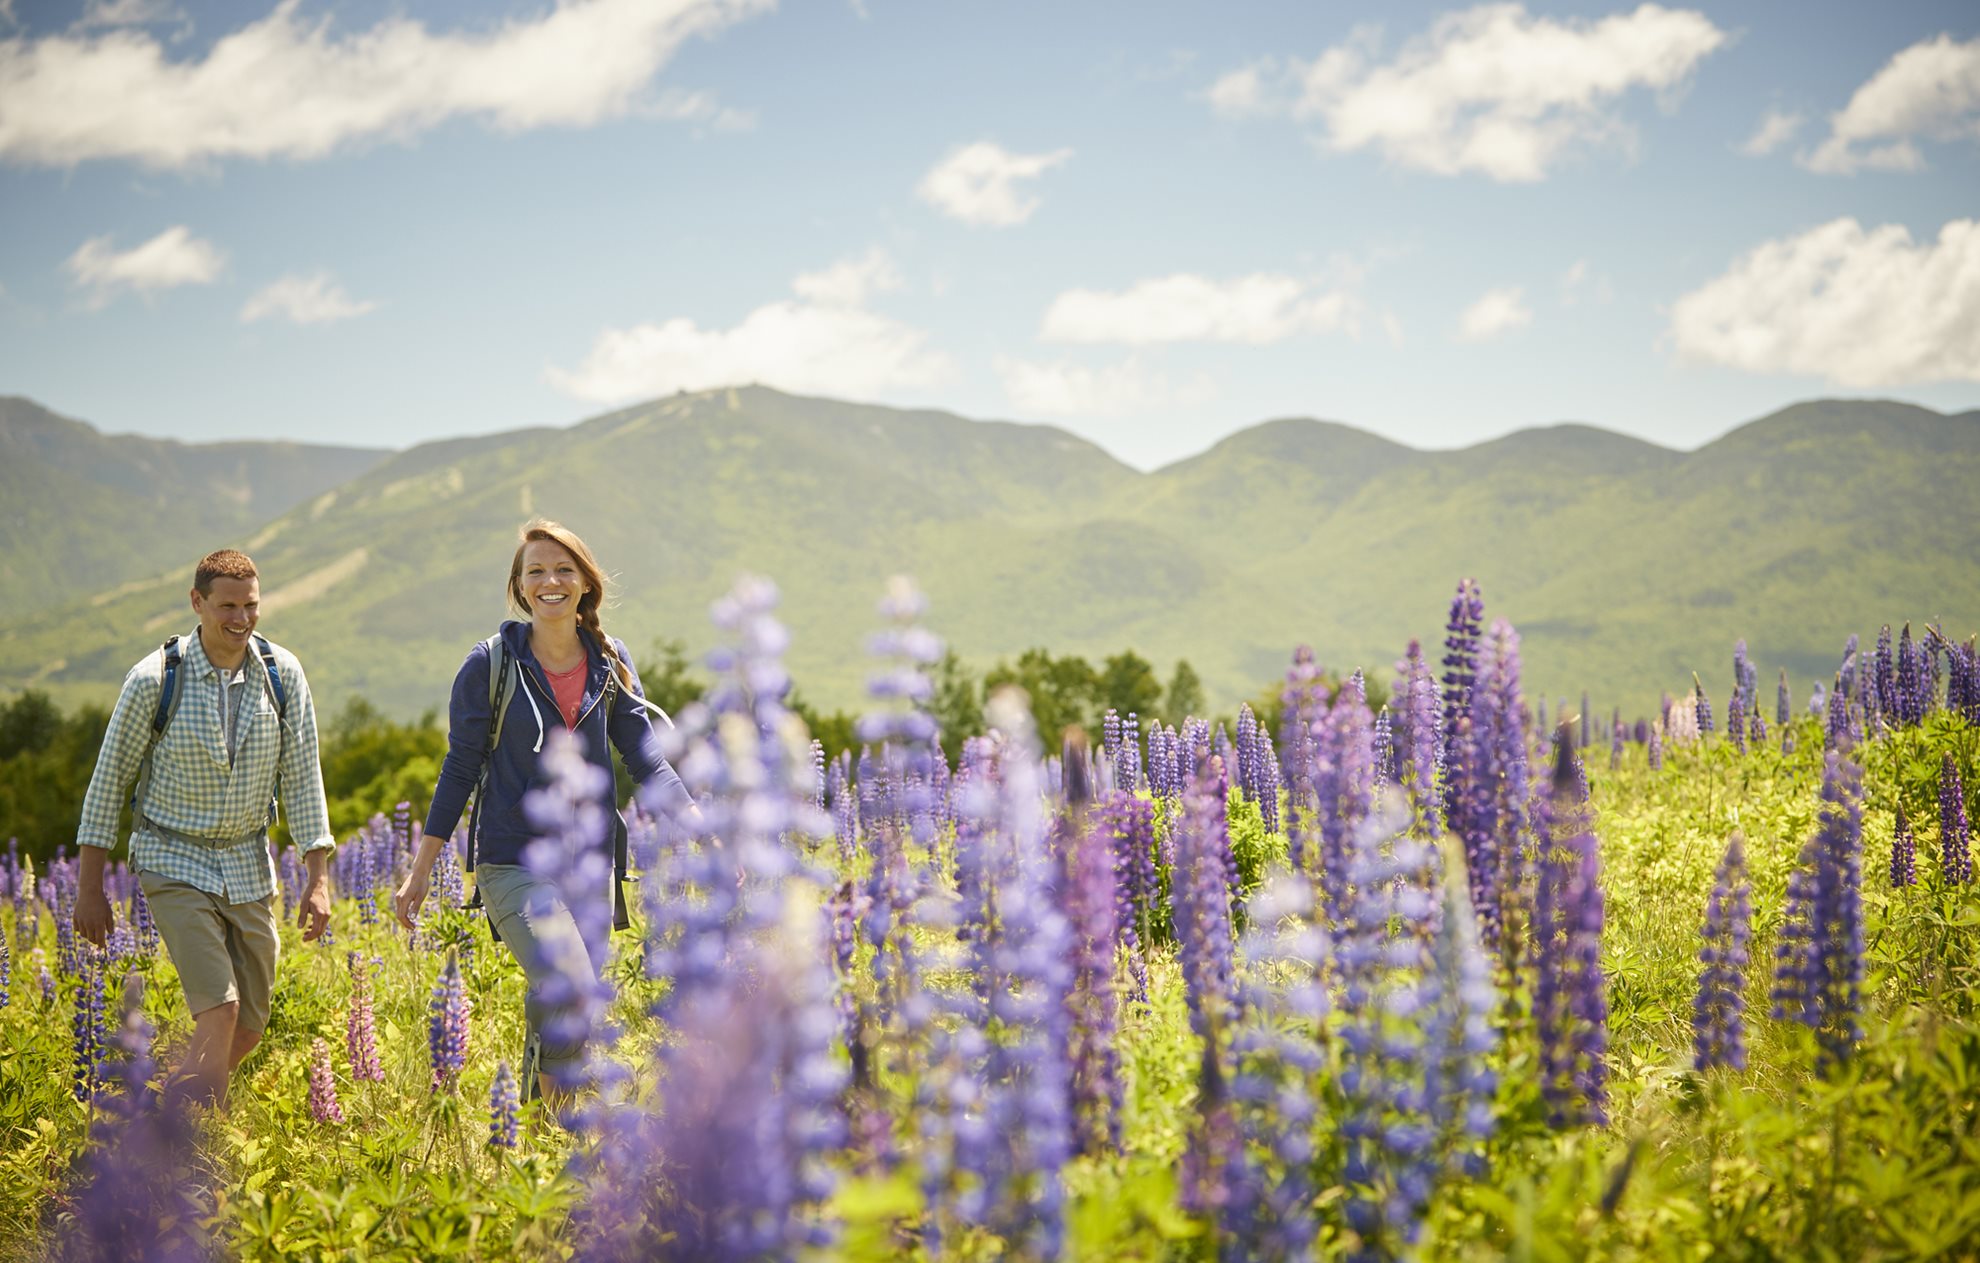 A man and a woman walking through a field of lupine